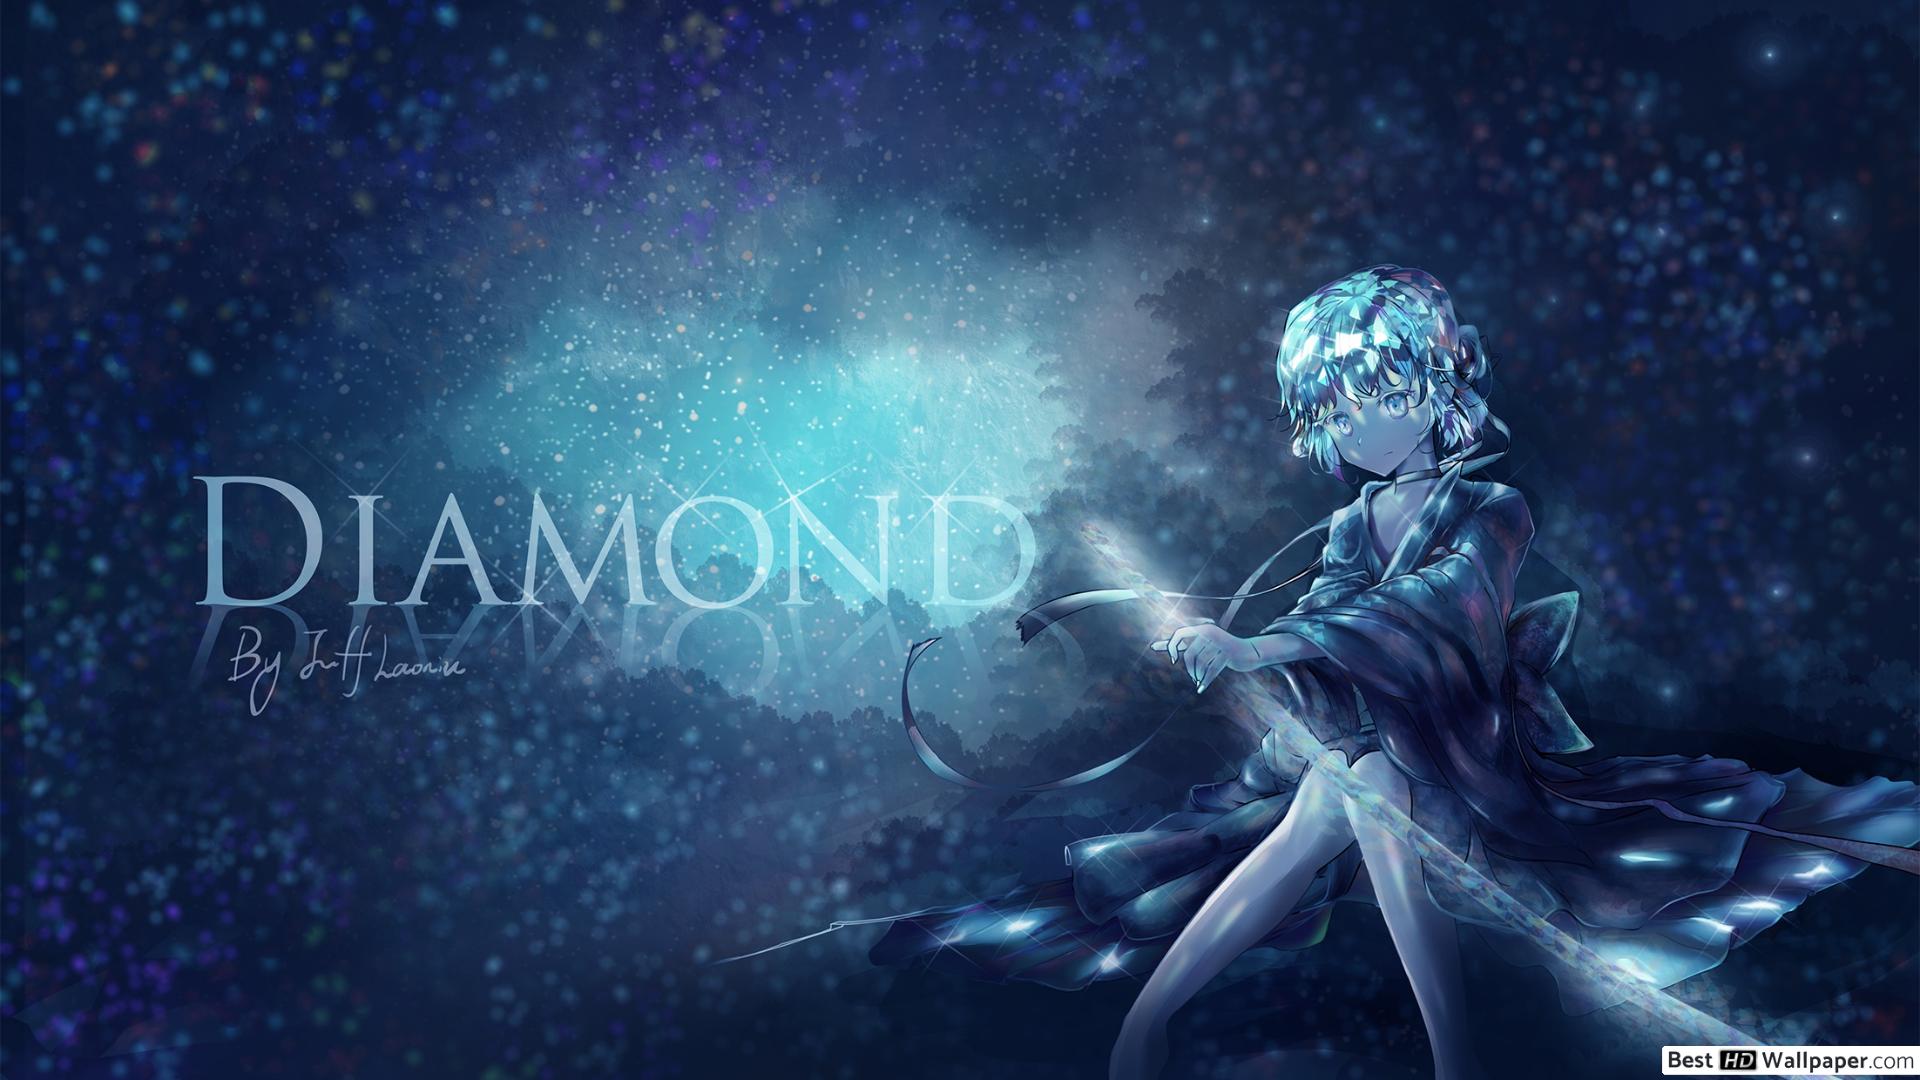 Diamond of the Lustrous HD wallpaper download